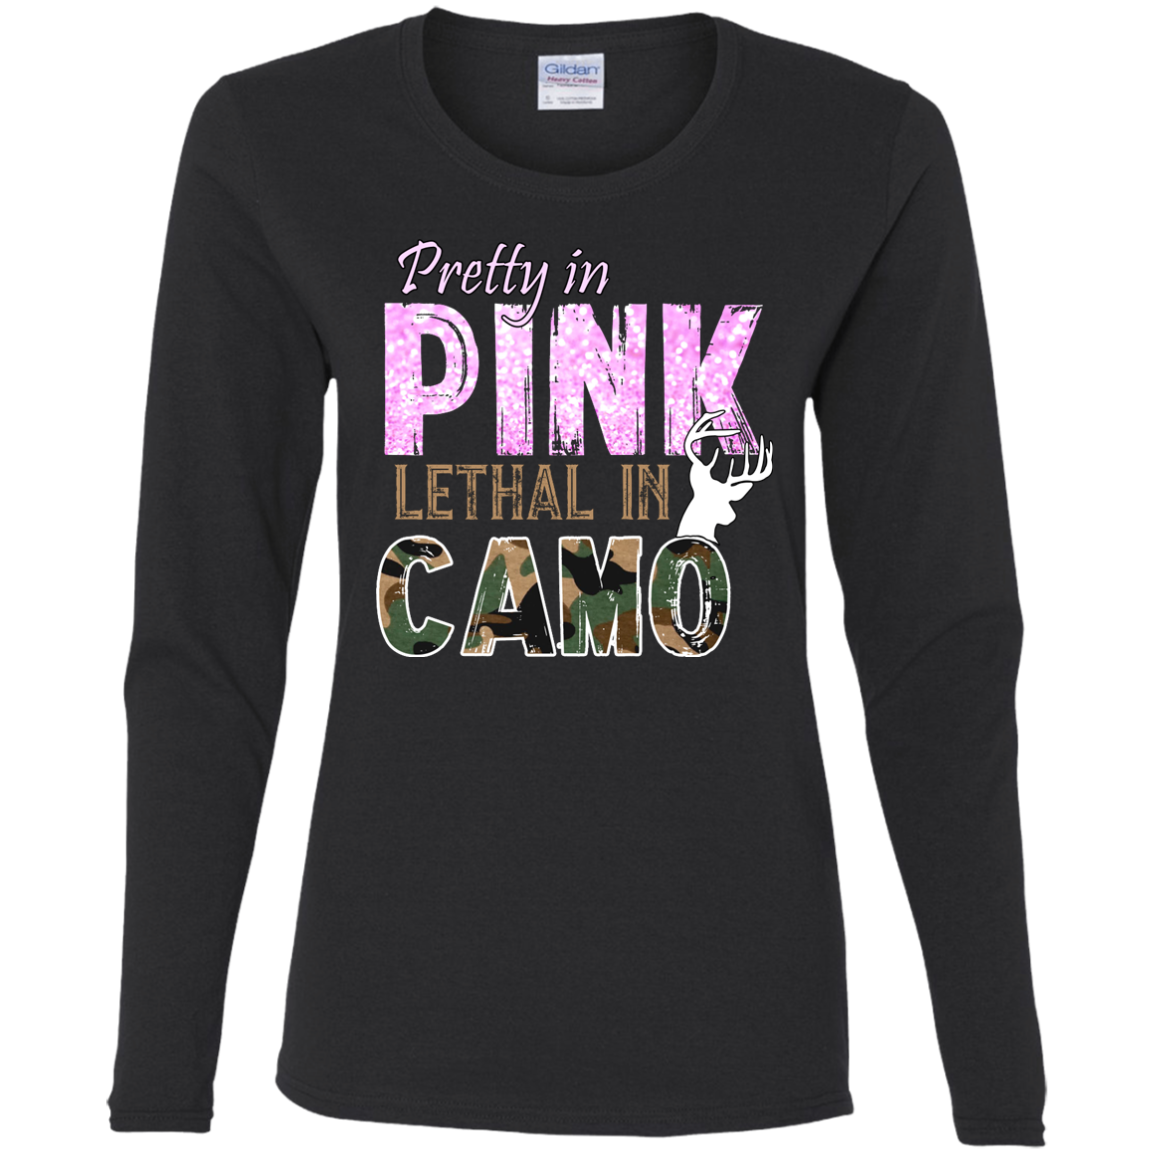 "Pretty In Pink. Lethal In Camo" Gildan Ladies' Cotton LS T-Shirt